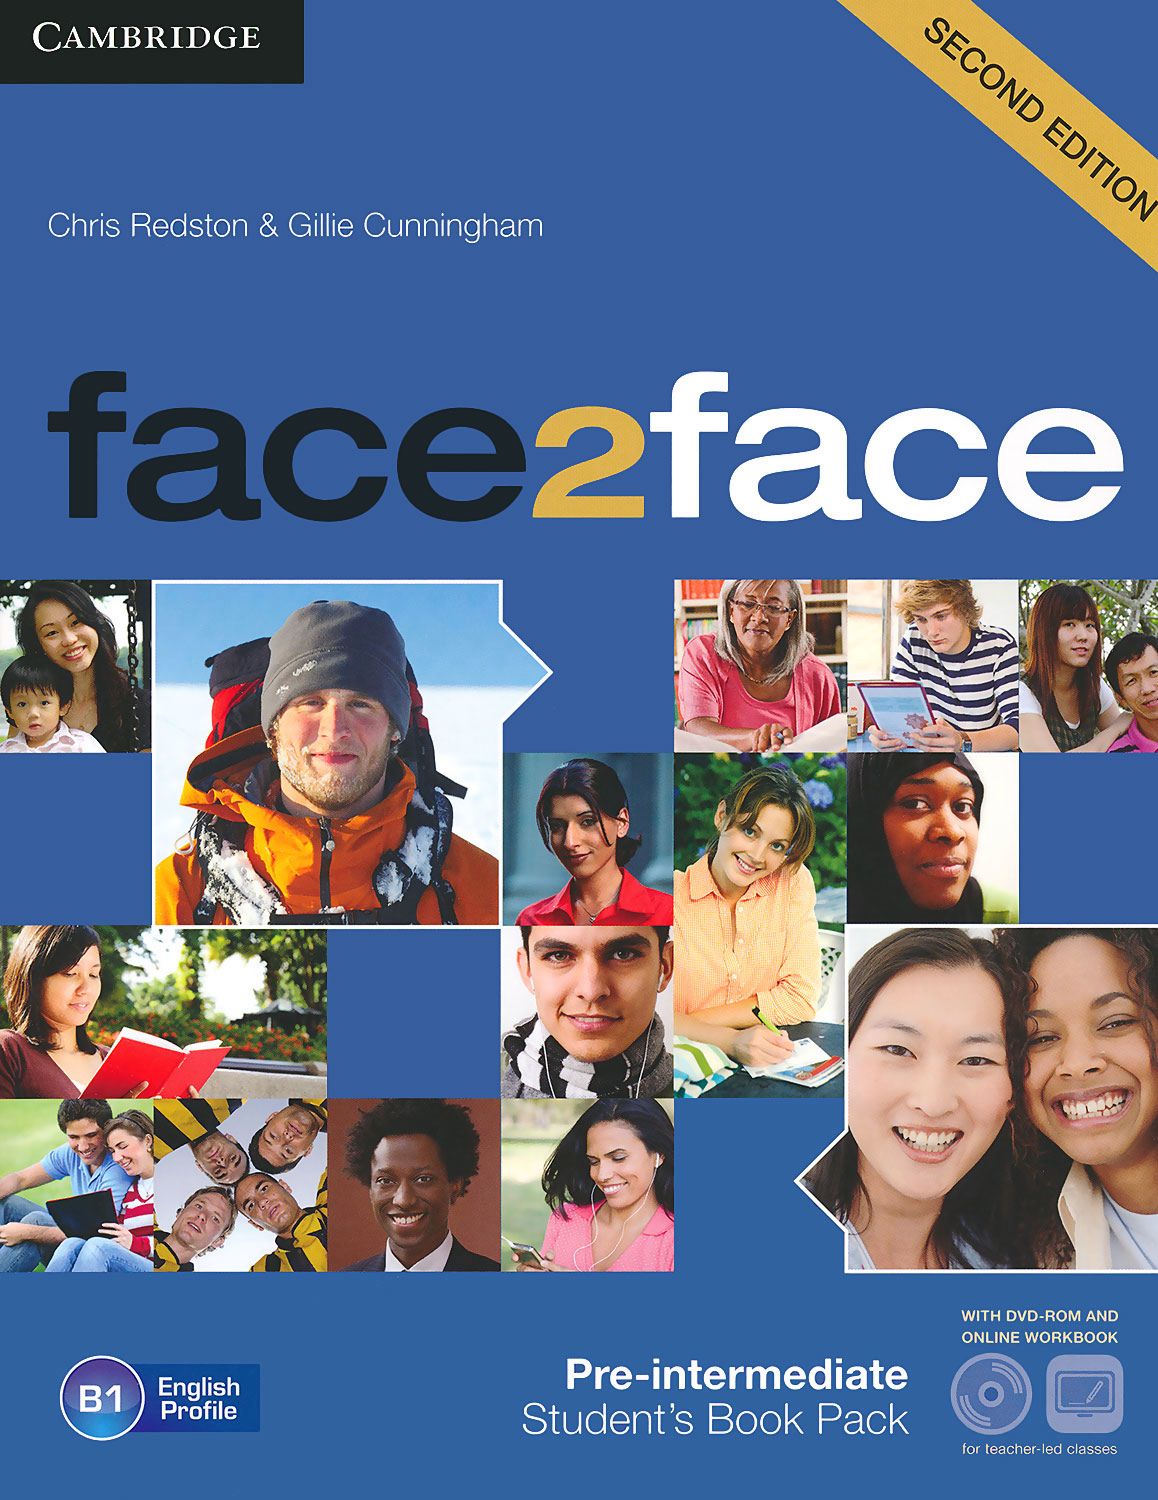 face2face complete collection english course